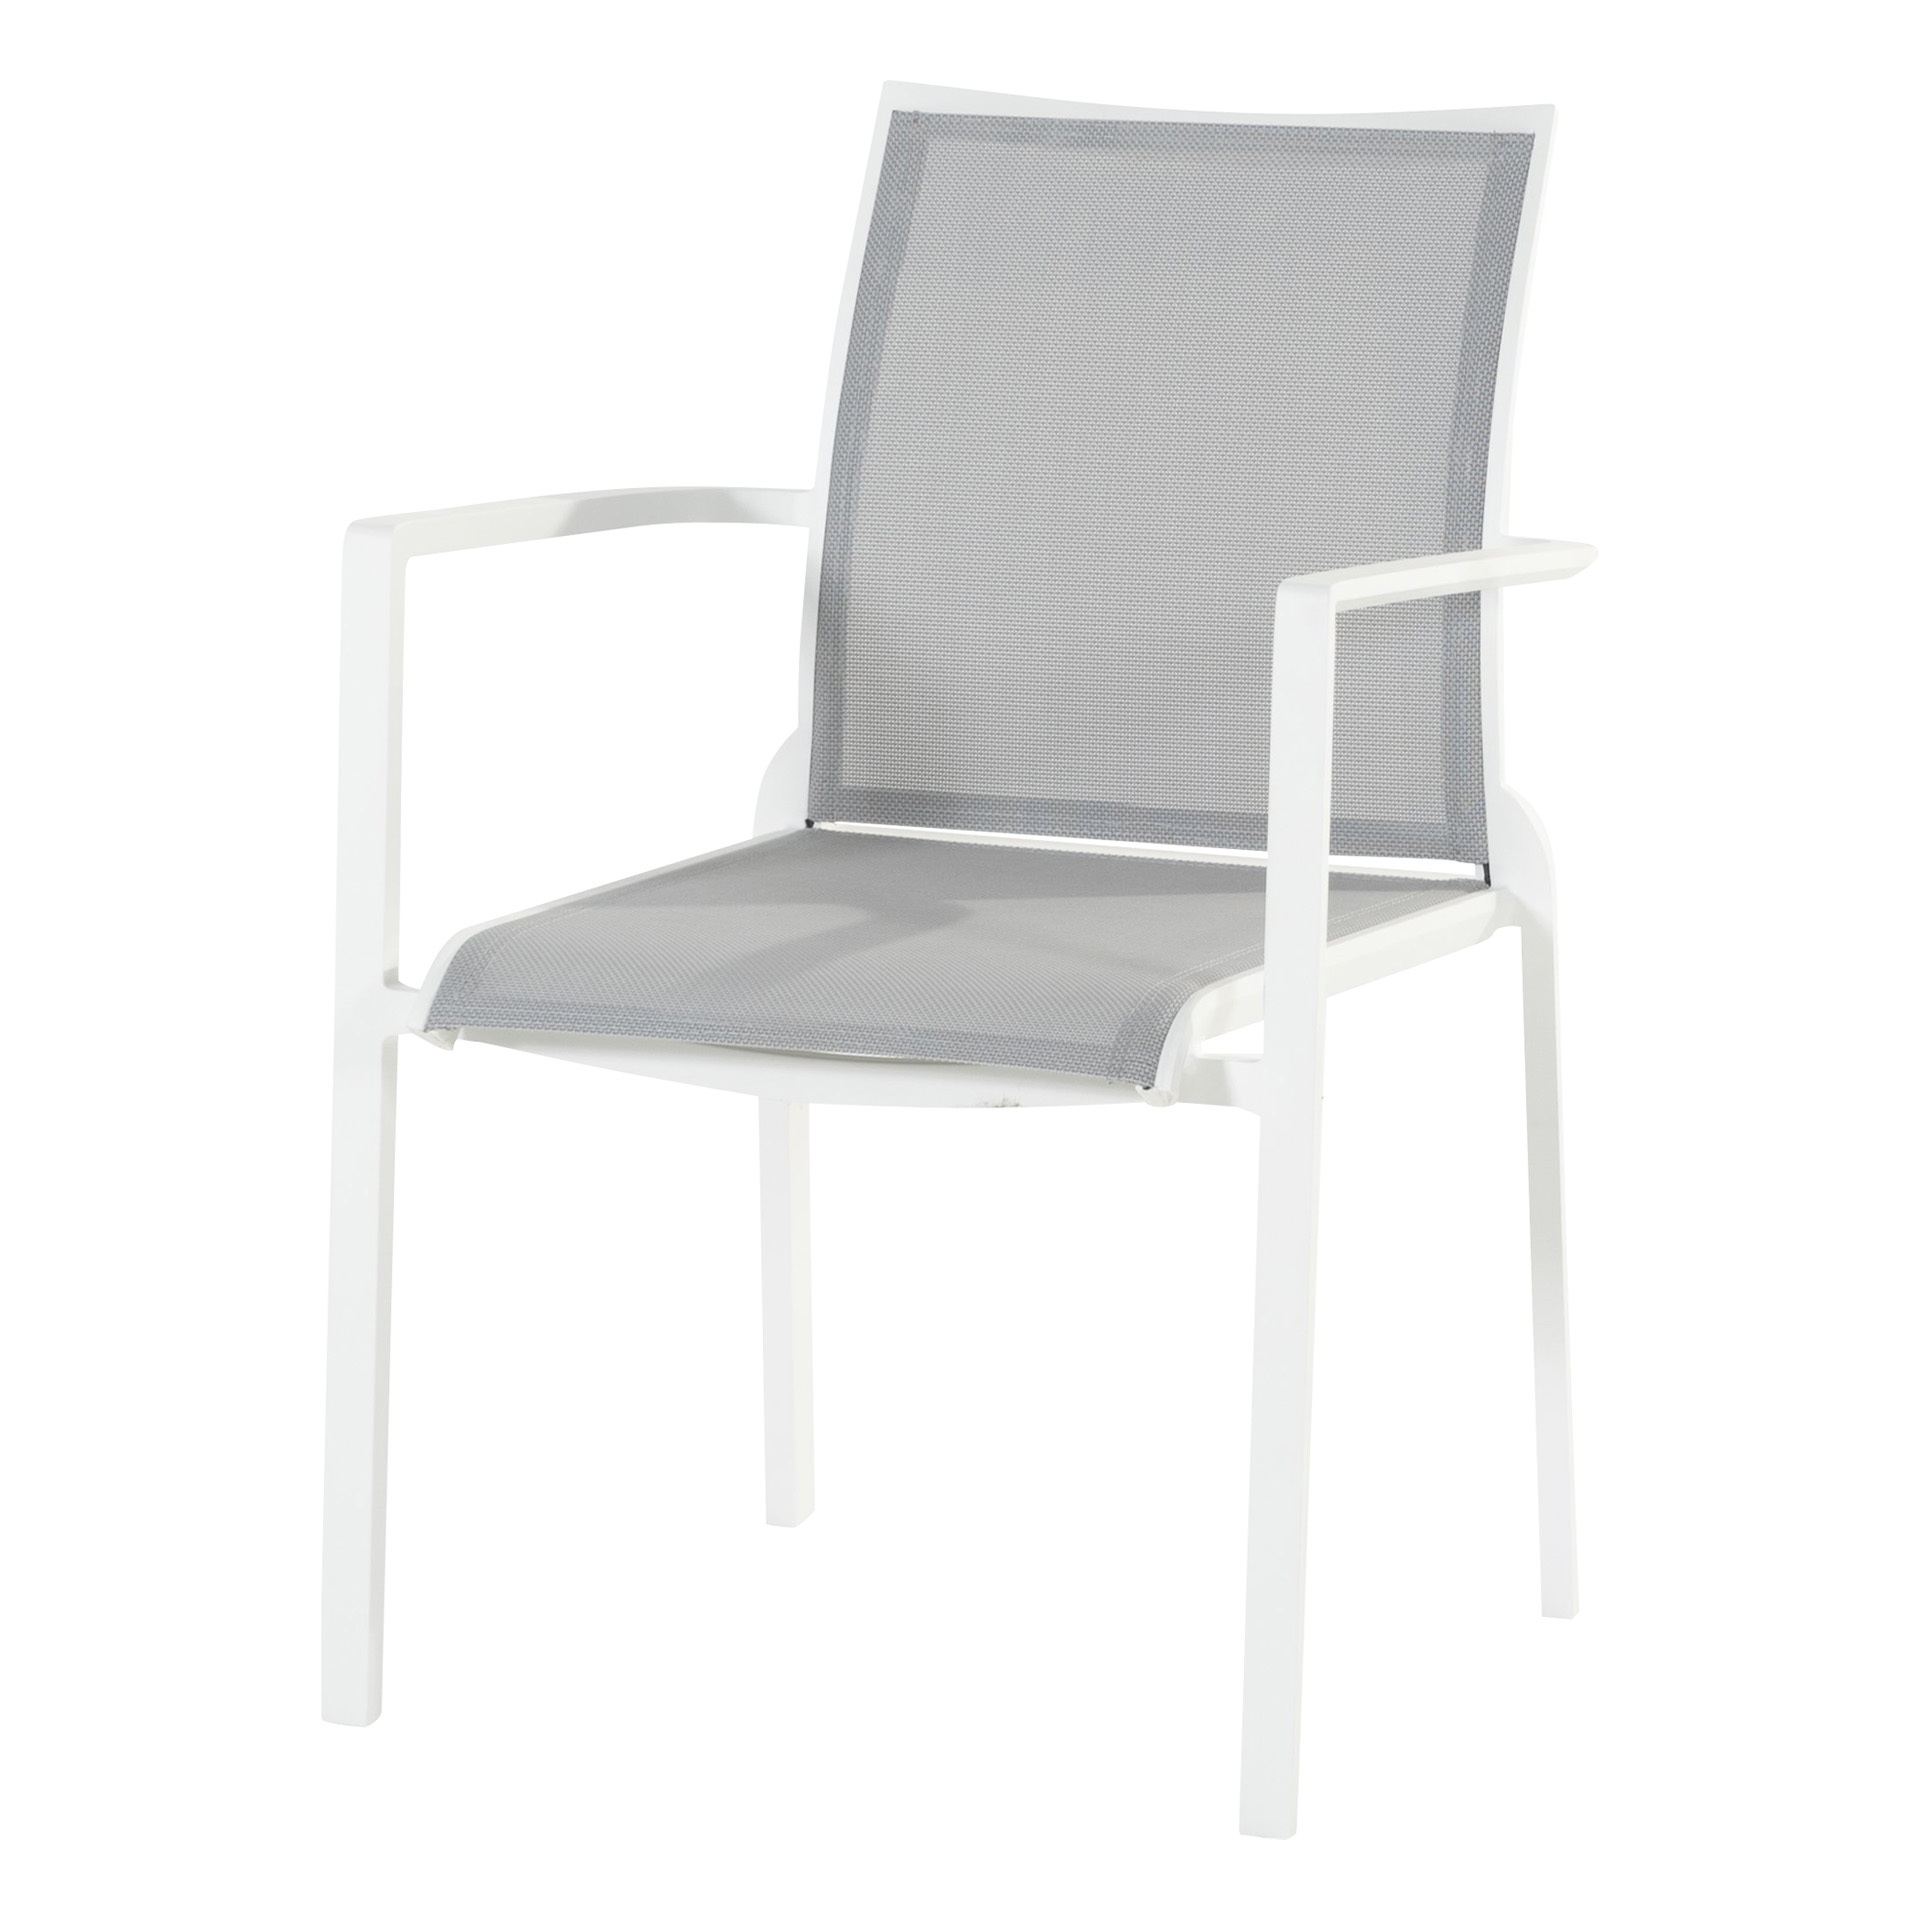 Melbourne stacking chair white